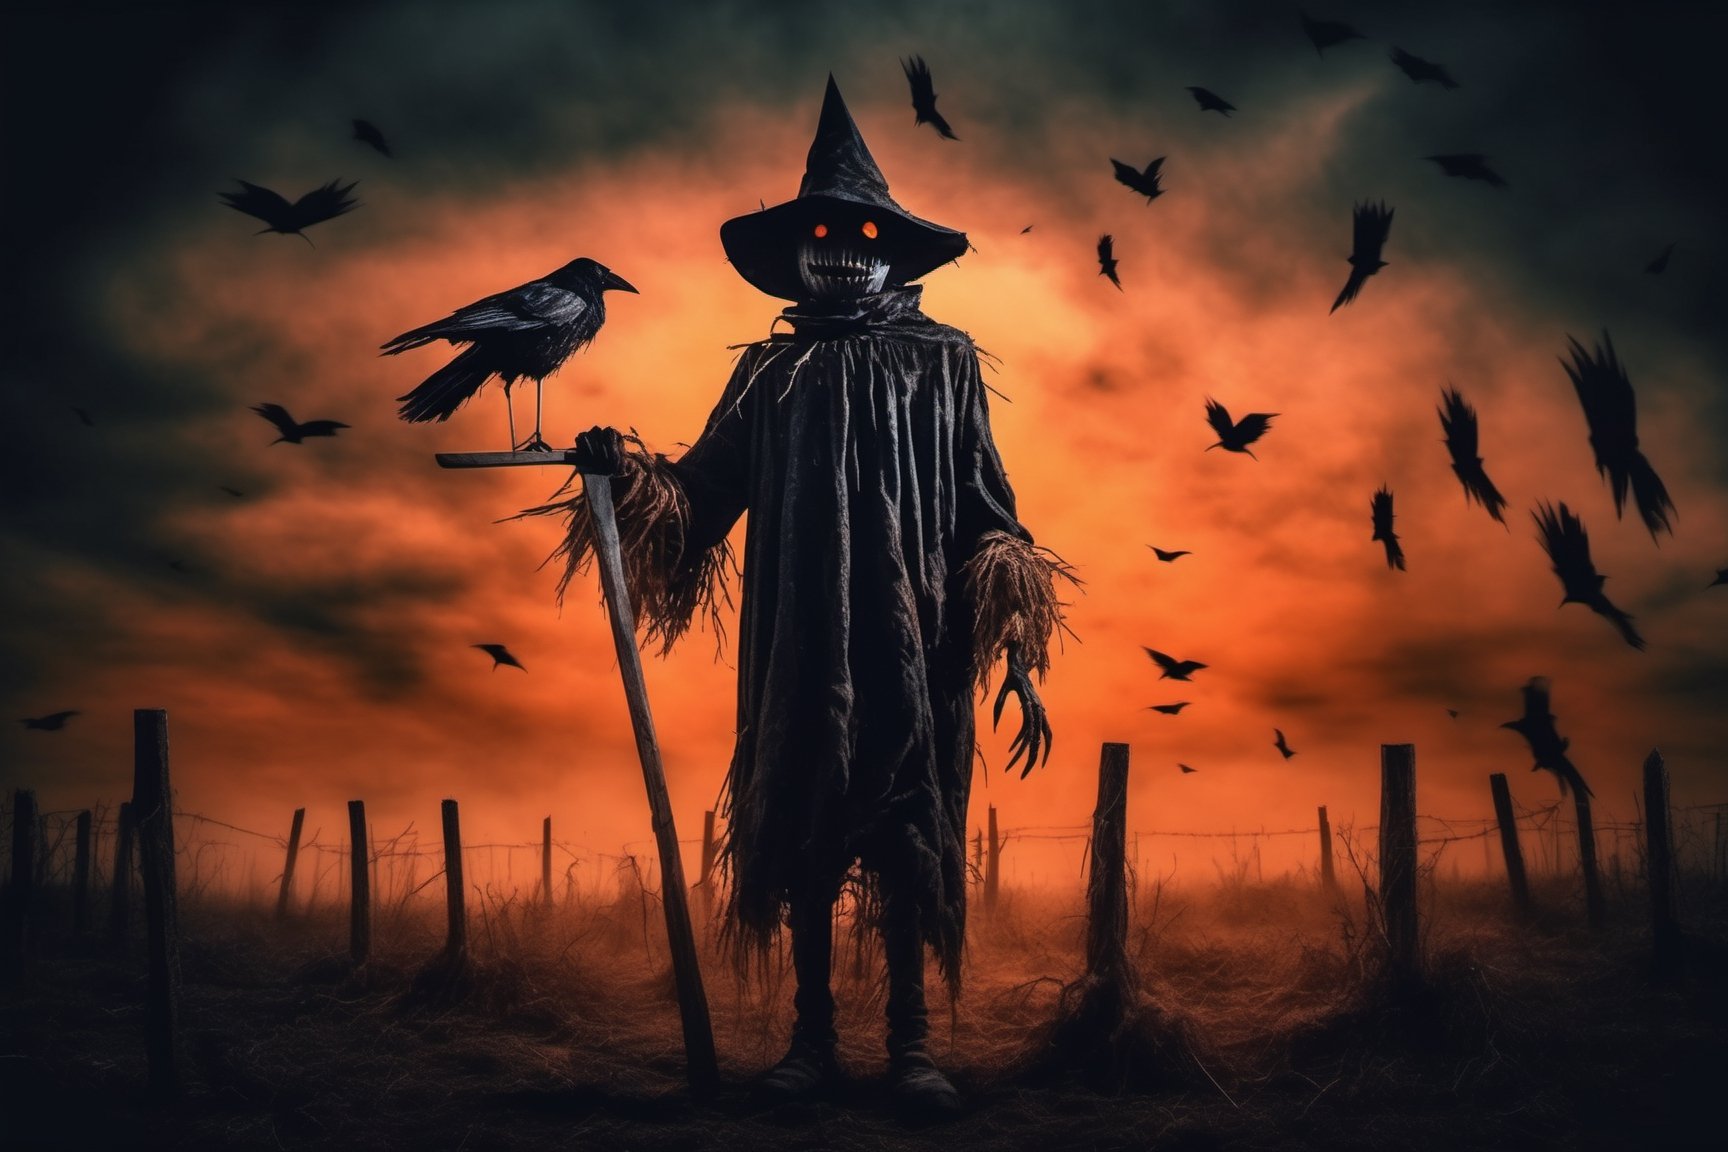 creepy full body scarecrow realistic with hatchet in hand at night foreboding background HD, flock of flying crows, tenebrism, strange, multi tonal orange and black gradient tumultuous sky, dark core, moderately controlled chaos, ghost core, Nicolas Samori